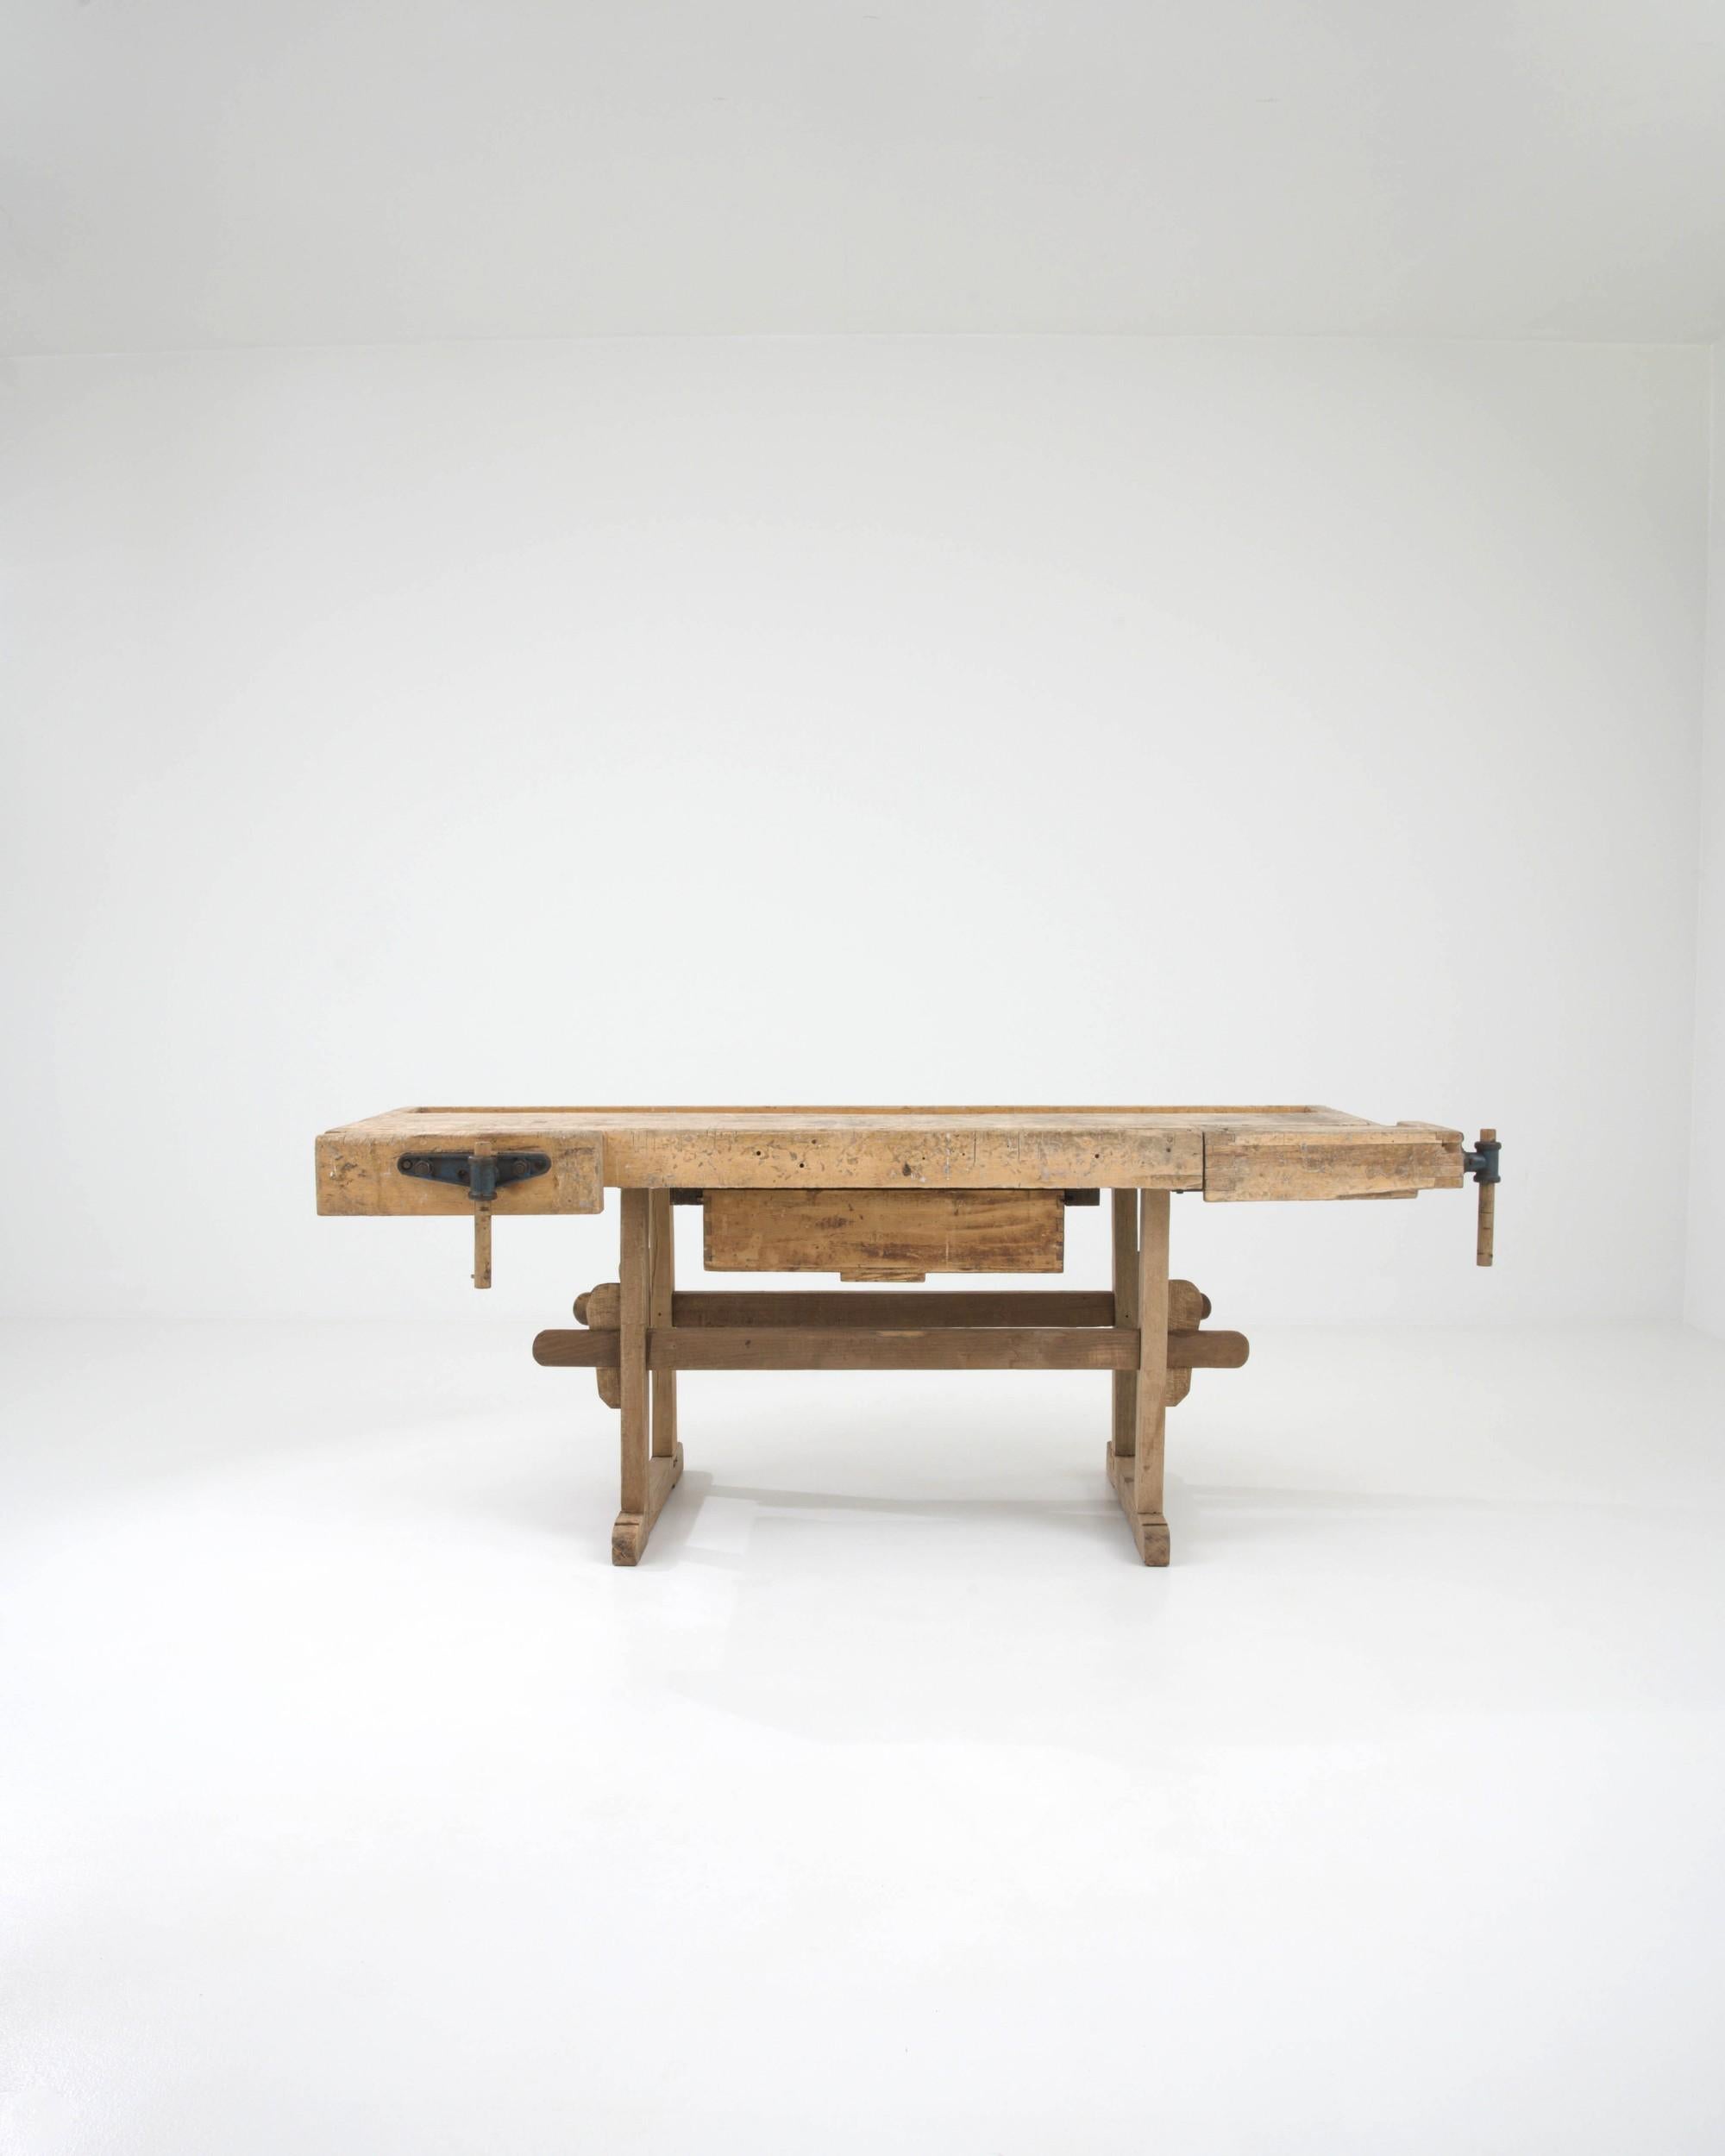 Robust and pragmatic, this vintage wooden work table cuts a handsome Industrial silhouette. Built in Central Europe in the 20th century, this piece would have originally formed part of a carpenter’s workshop. Every detail of the form serves a